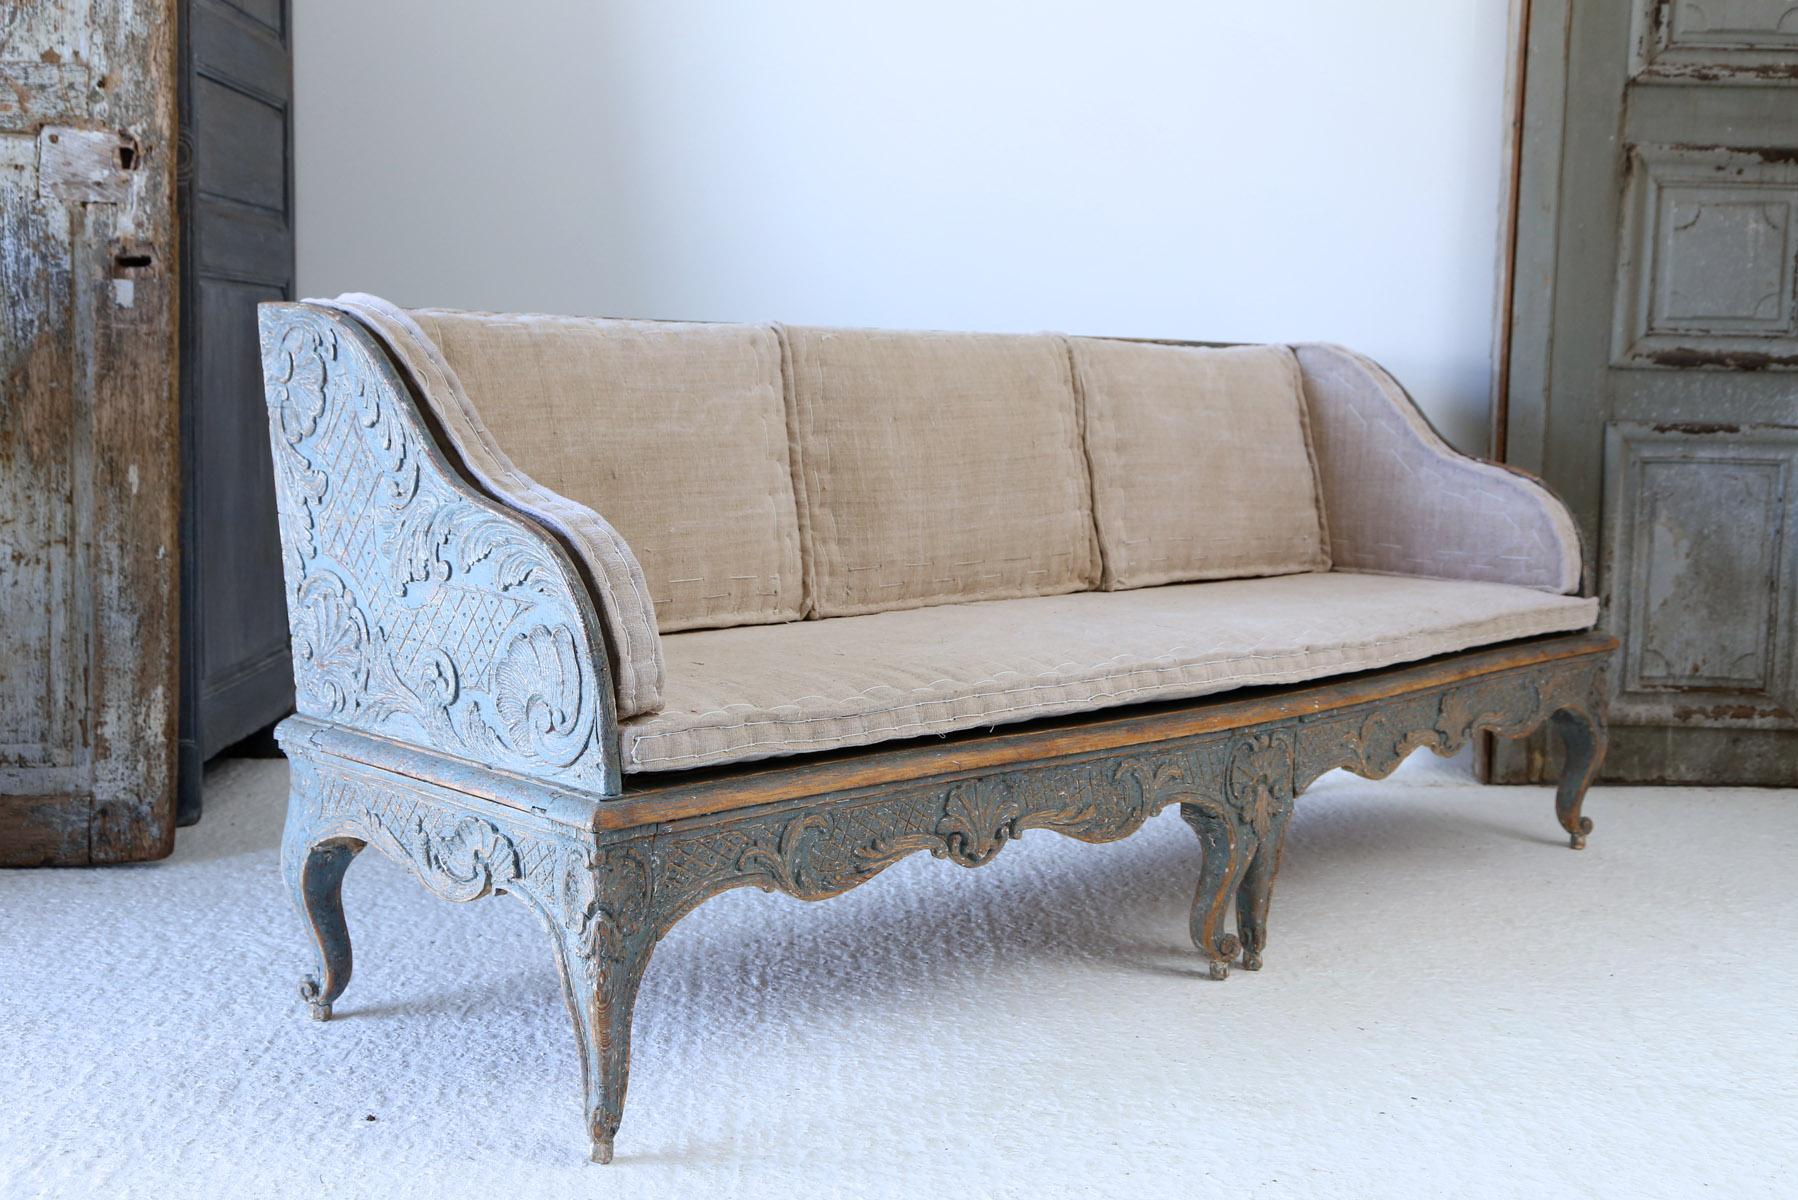 A fine example of a 18th century Swedish carved wood sofa with original paintwork and later upholstery. The carving on the sofa is extremely good with lots of detail